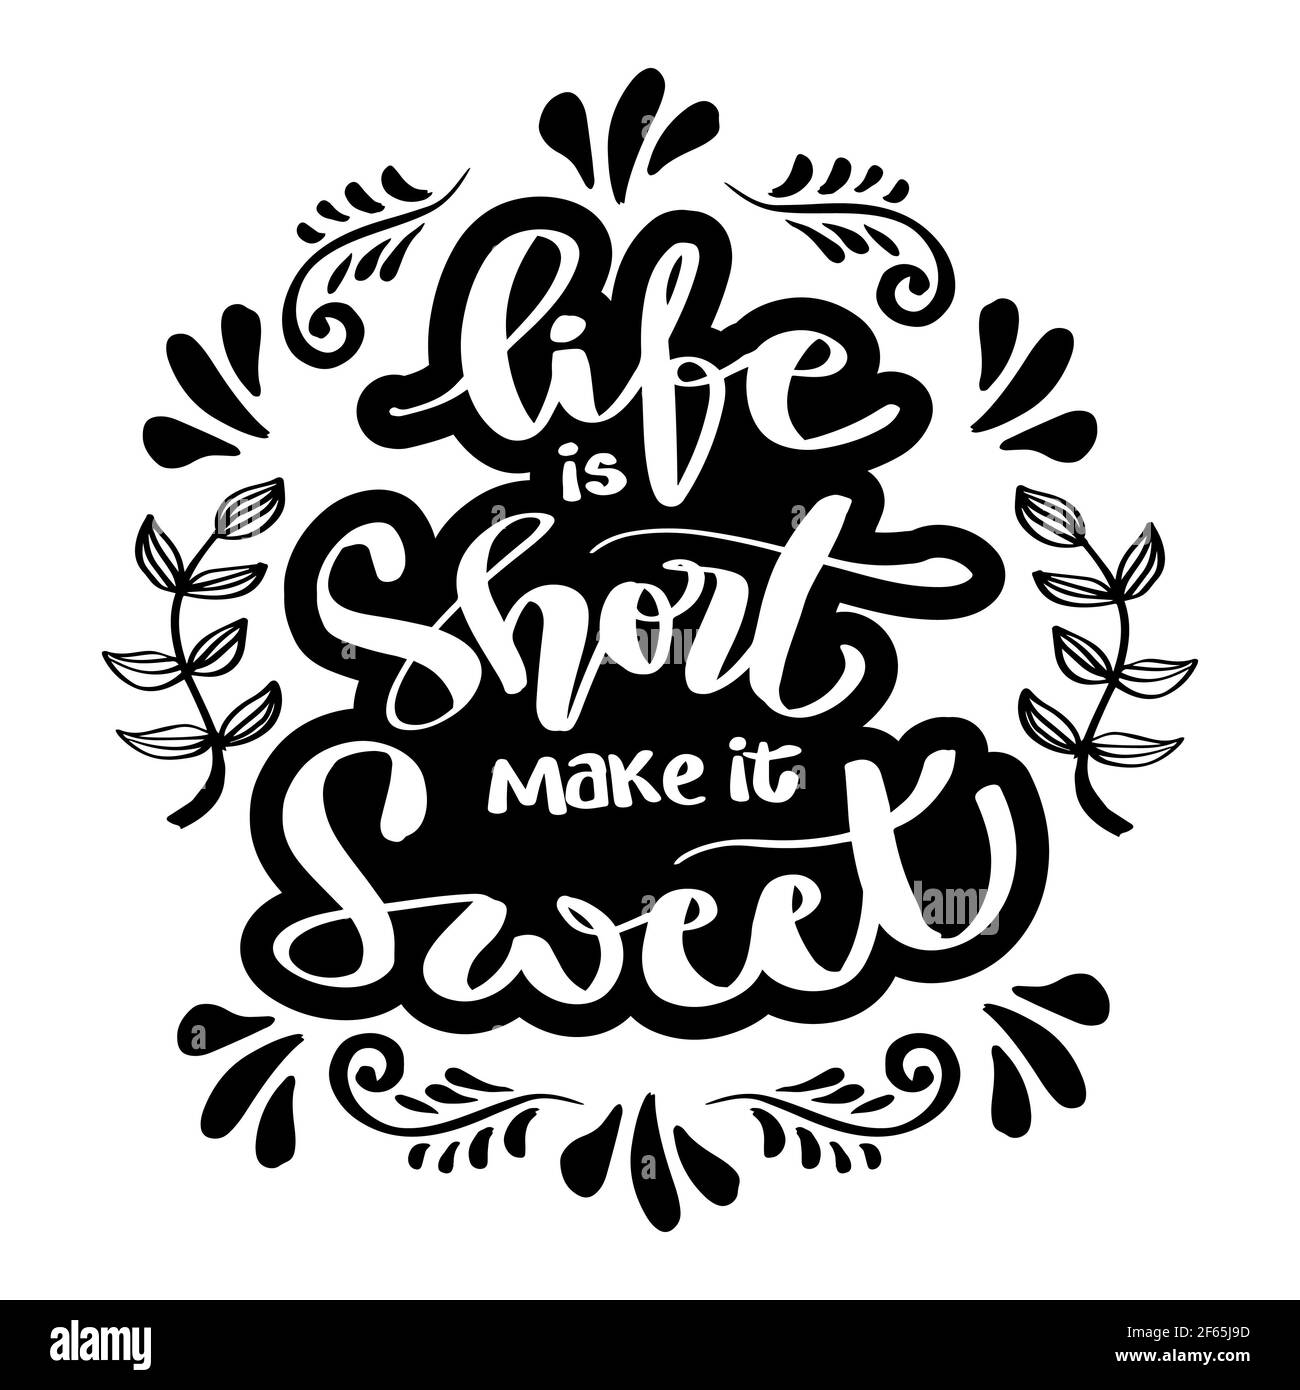 Life is short make it sweet. Handwritten lettering. Motivational quote  Stock Photo - Alamy